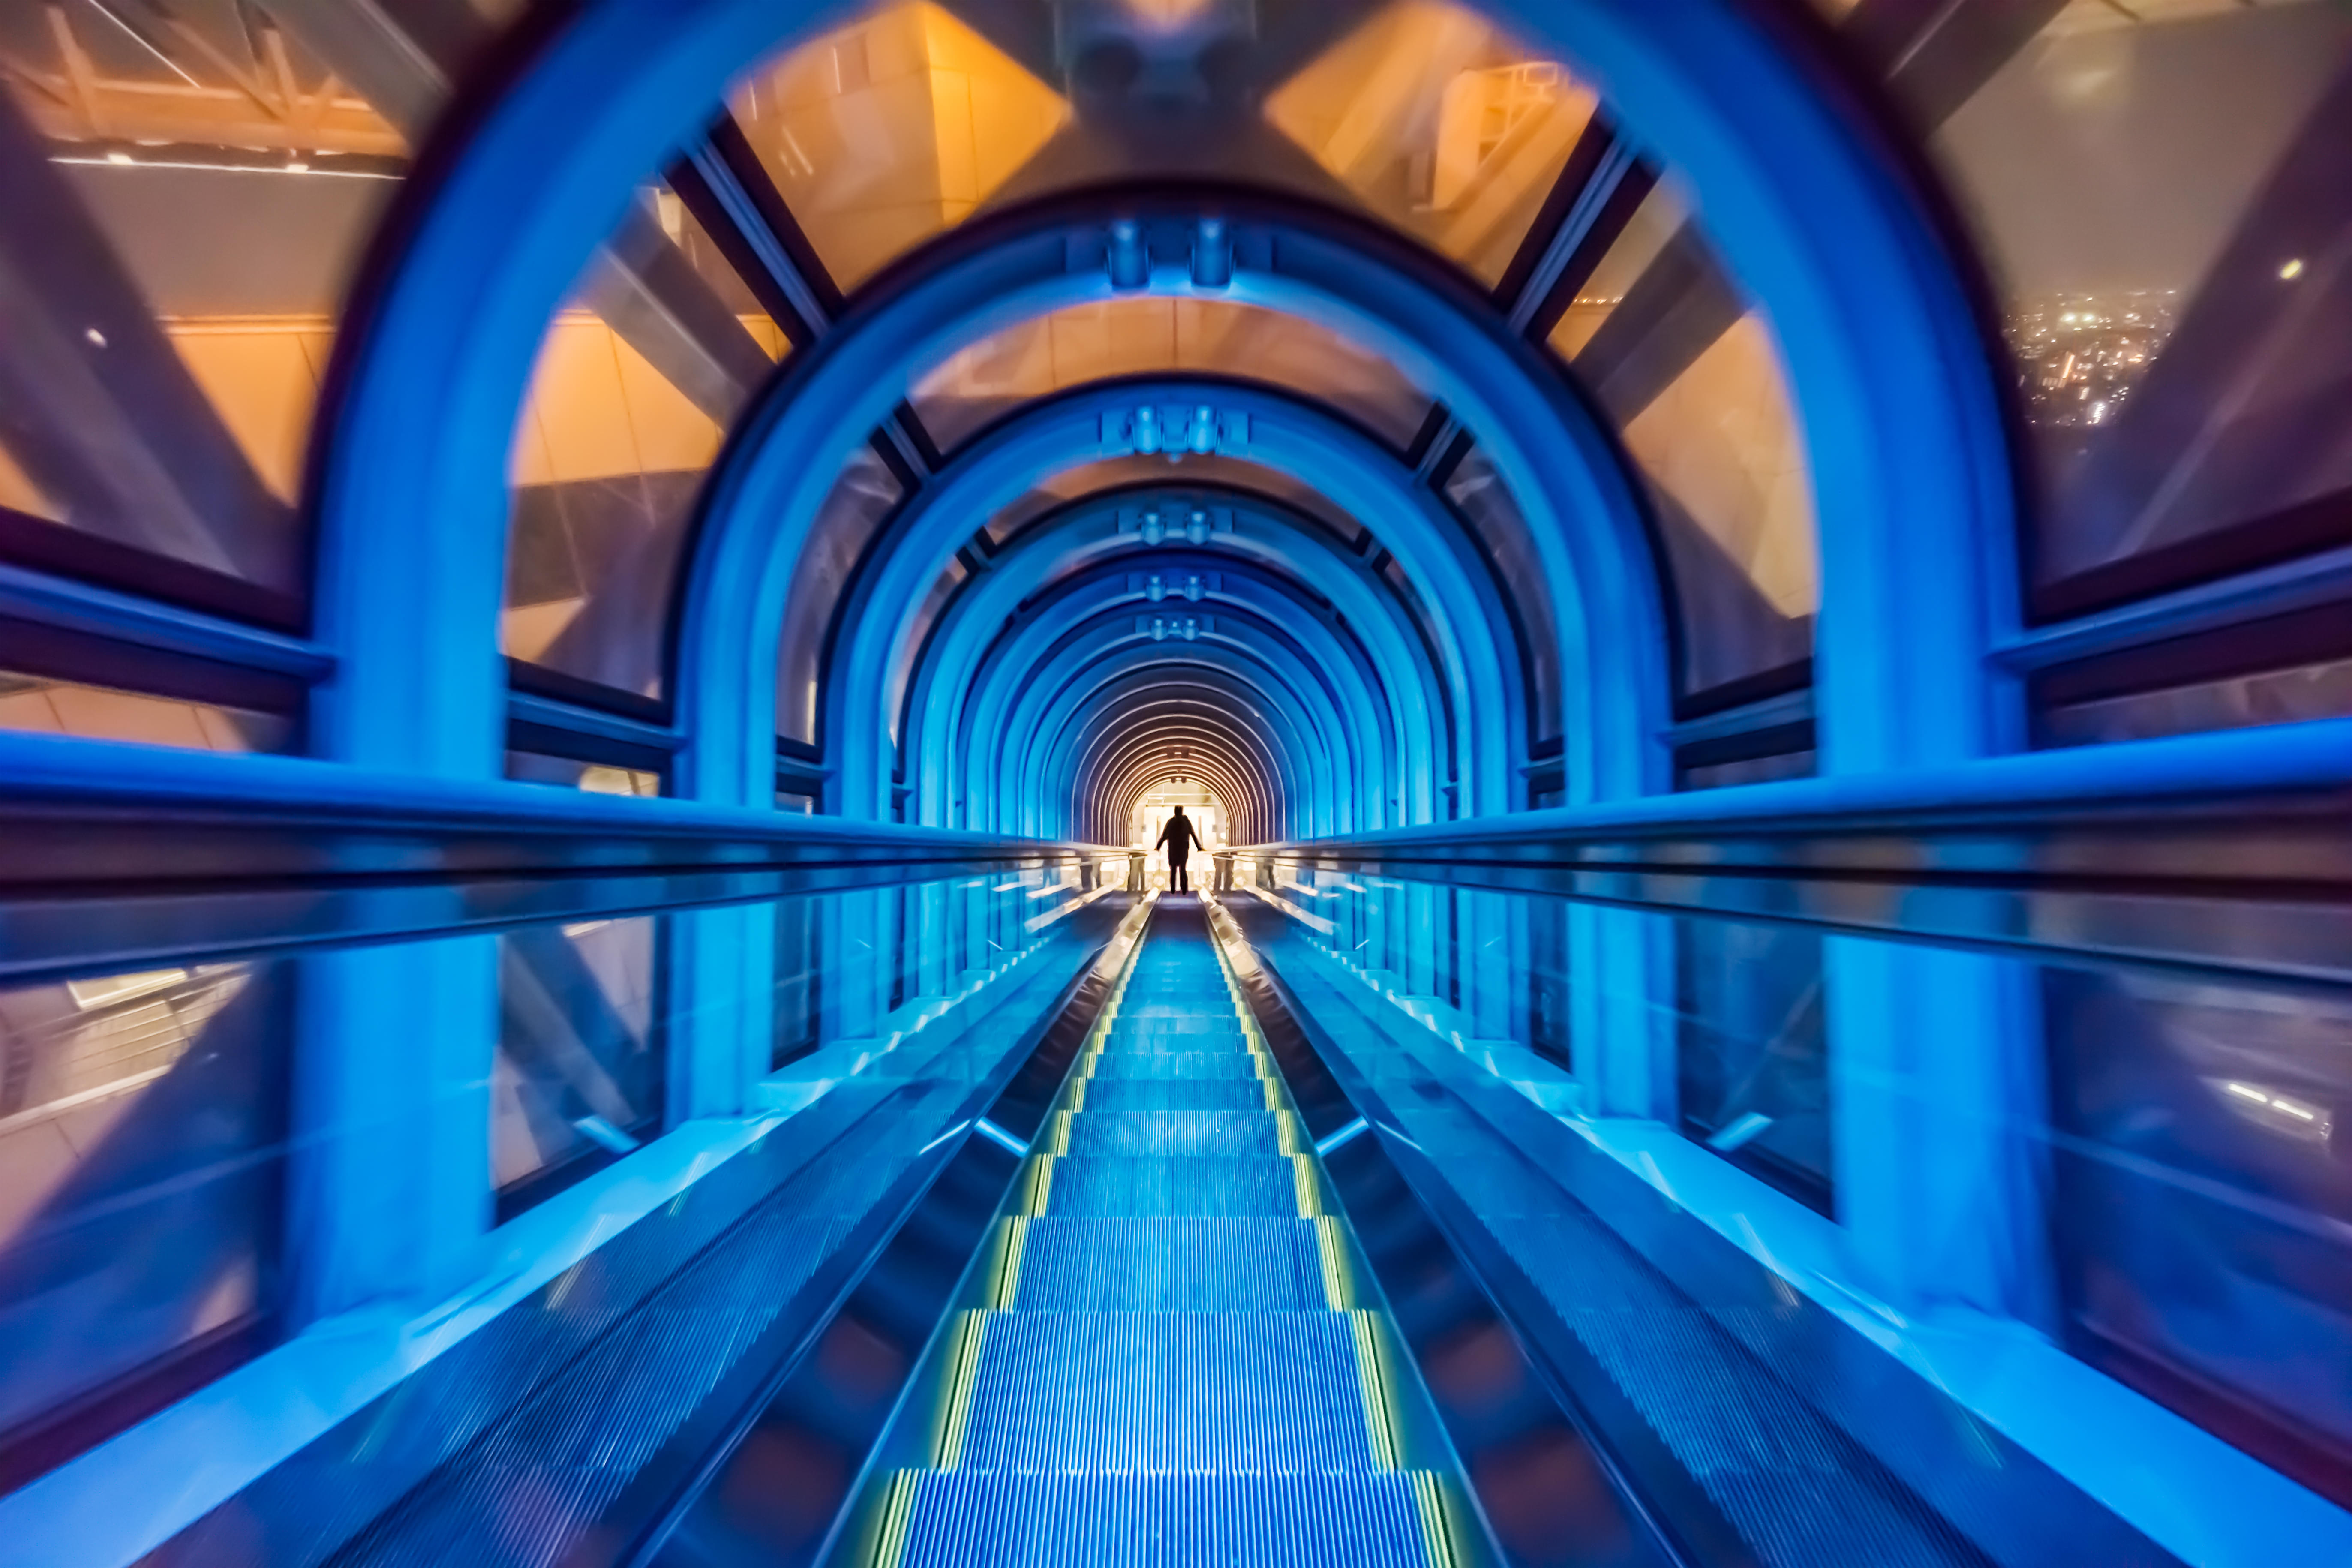 Visit the Umeda Sky Building, and explore the 19th tallest building in the city